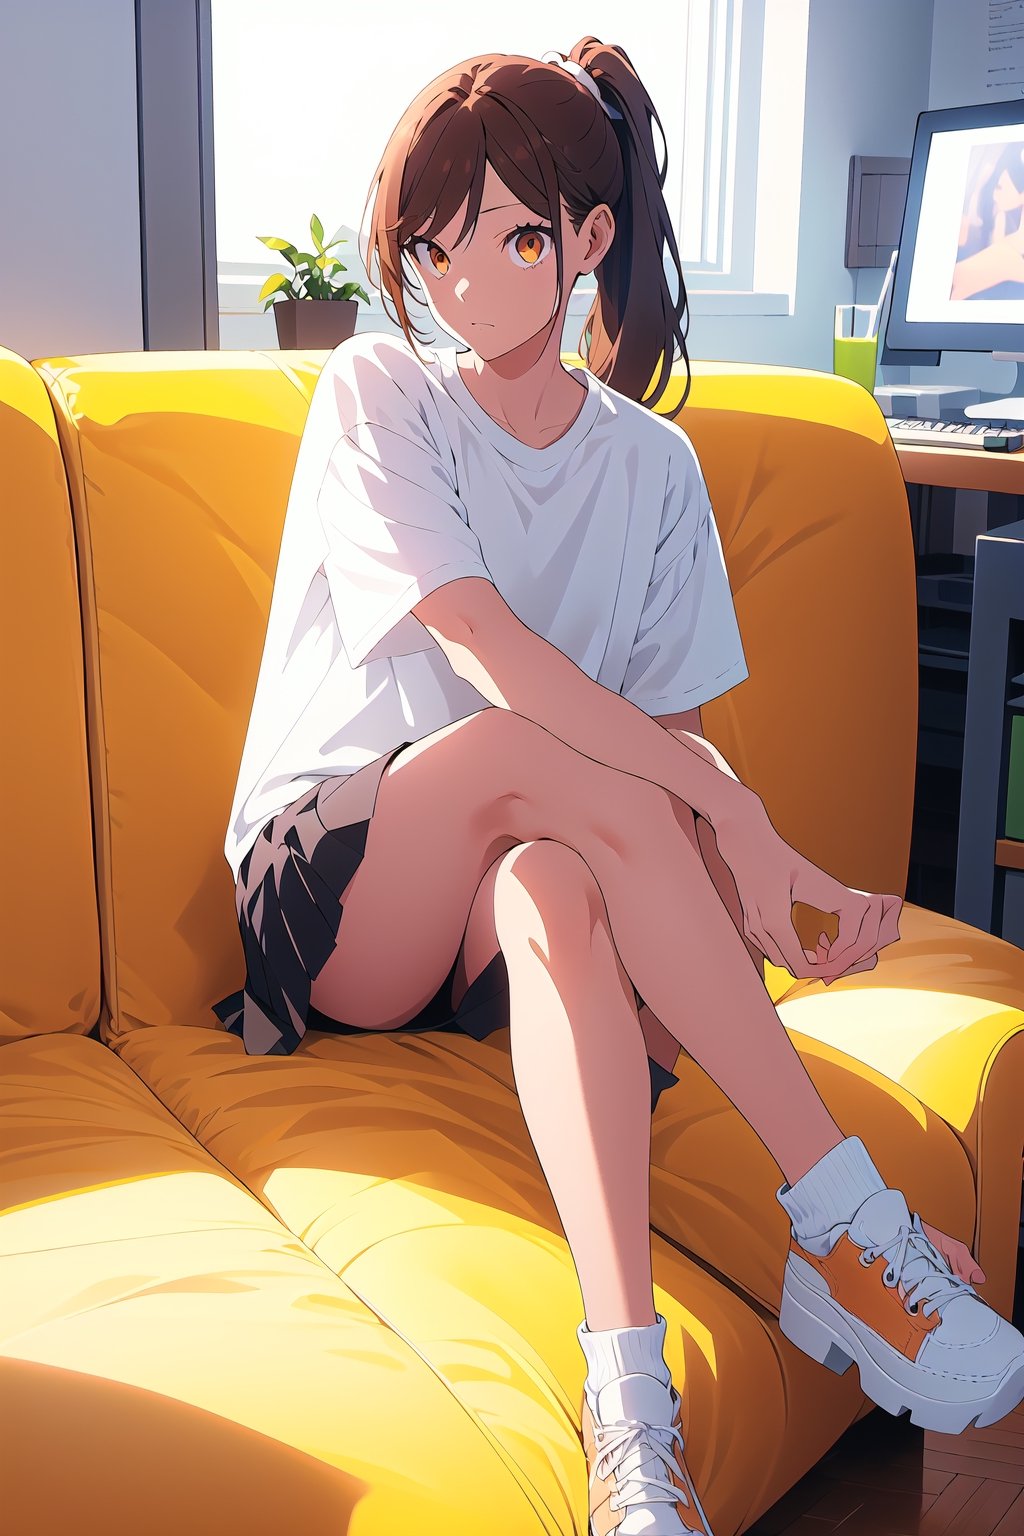 1girl,25 years old,ponytail,brown eyes,brown hair,portrait, white oversized sportswear,white t-shirt, miniskirt,big thights,crossed legs,illustration,fcloseup,rgbcolor, full_body, sitting, vintage sofa,front view, looking_at_viewer, smug look,photostudio,emotion,body looking forward, midnight